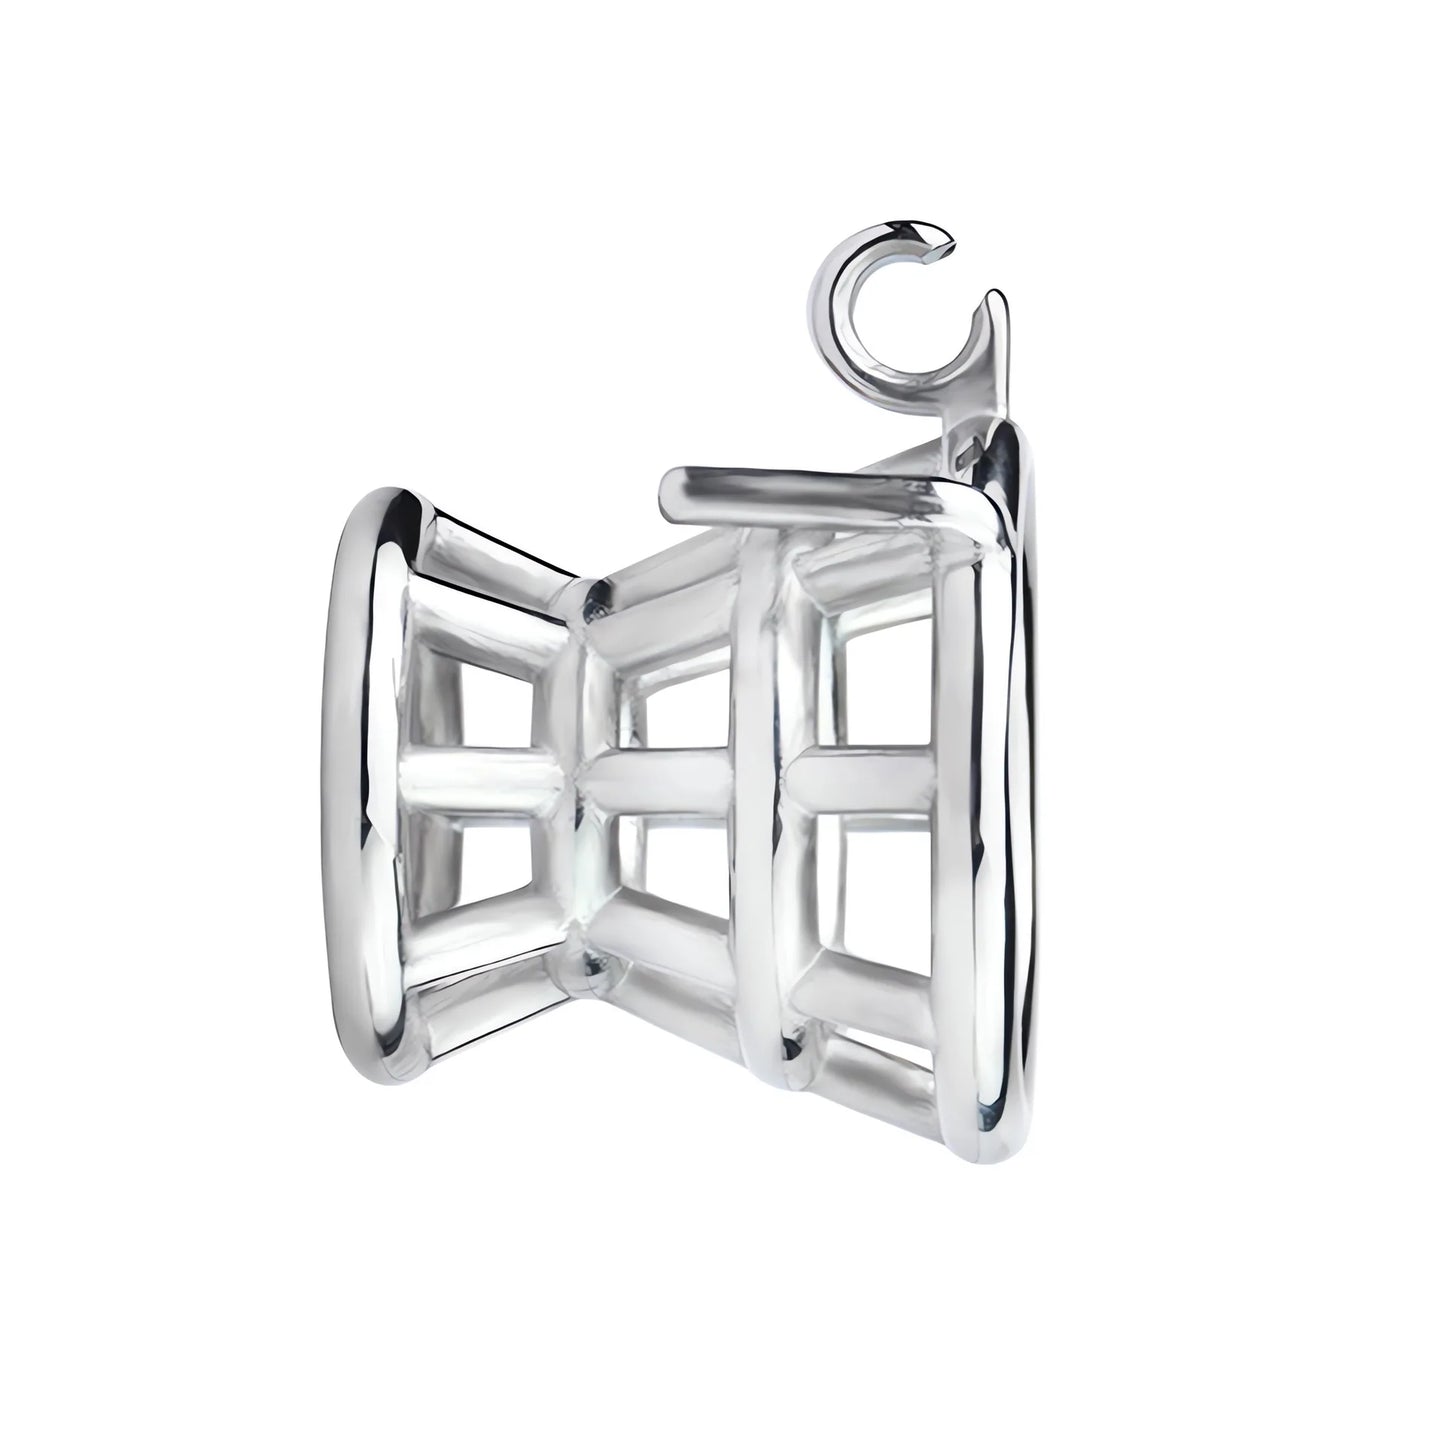 Metal Inverted Chastity Cage Stainless Steel Negative Chastity Device For Men - InvertedChastity